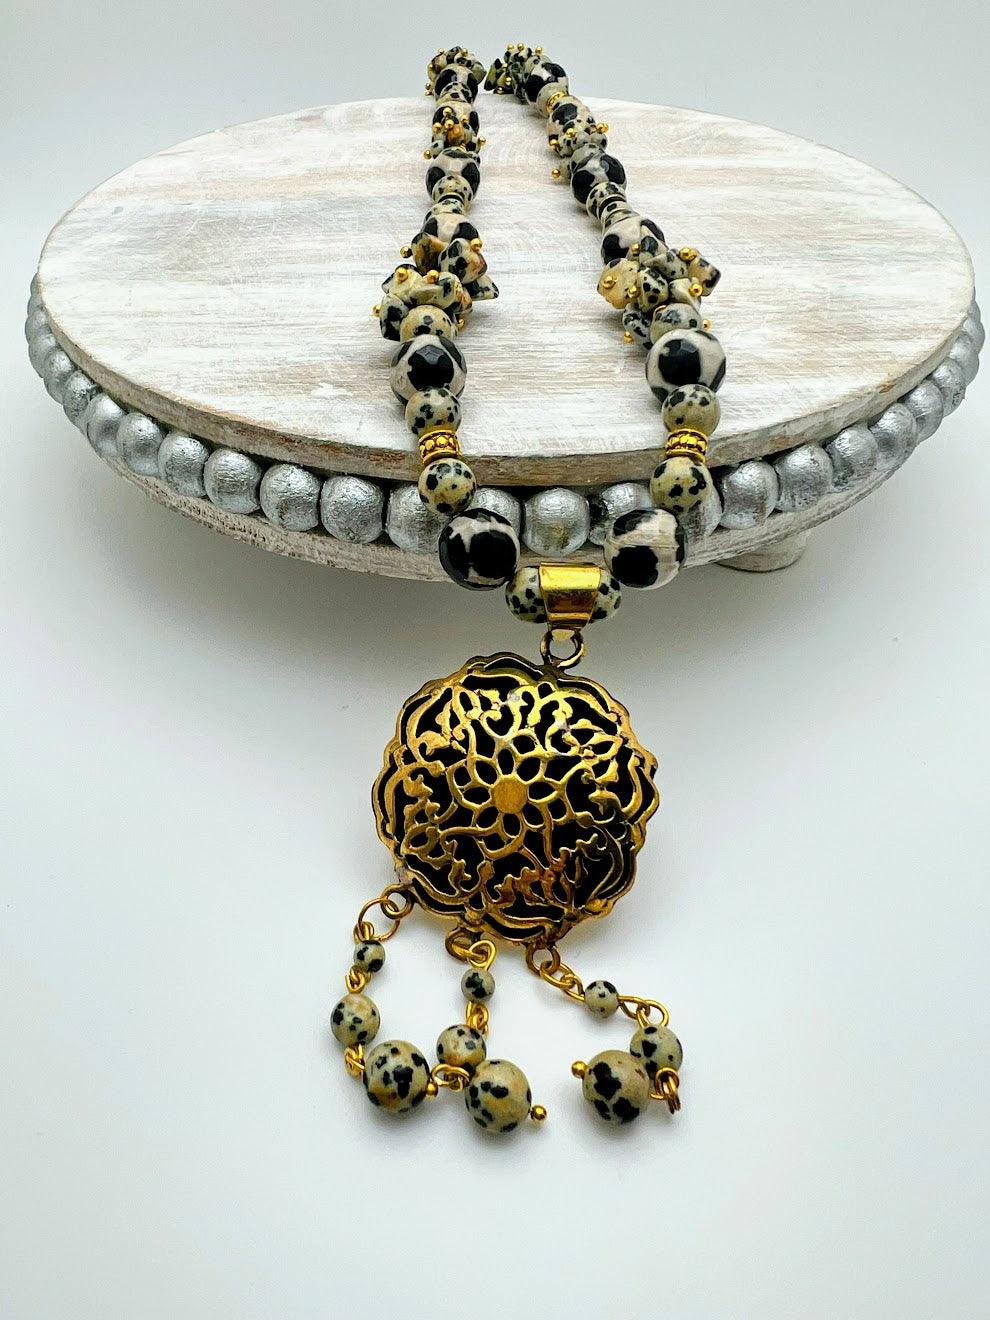 Tiger Necklaces With Agar Beads (2 Different Designs)